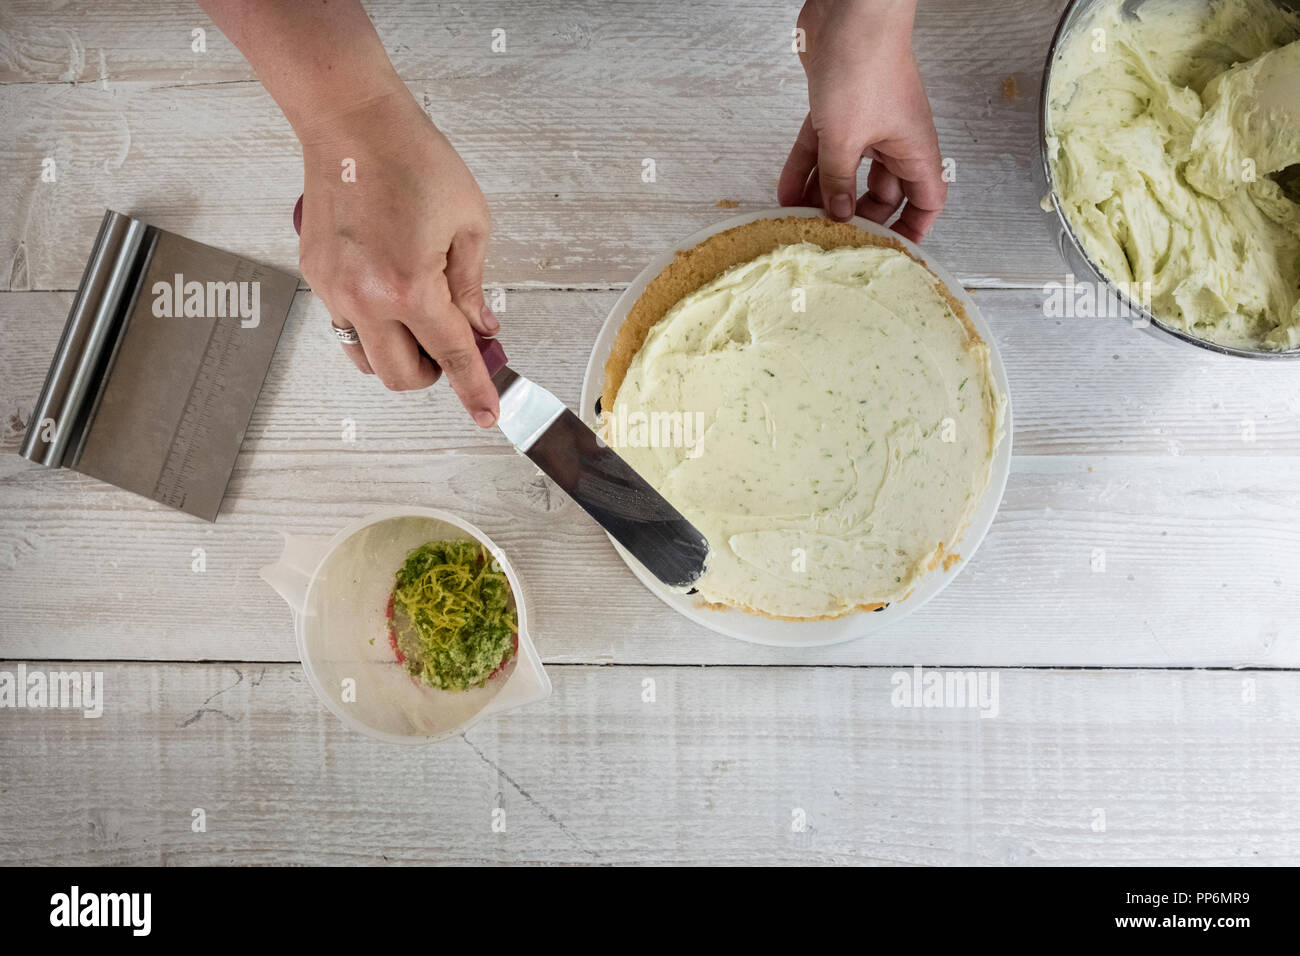 High angle view of a person smoothing buttercream icing over a fresh baked gin and tonic flavoured cake. Stock Photo